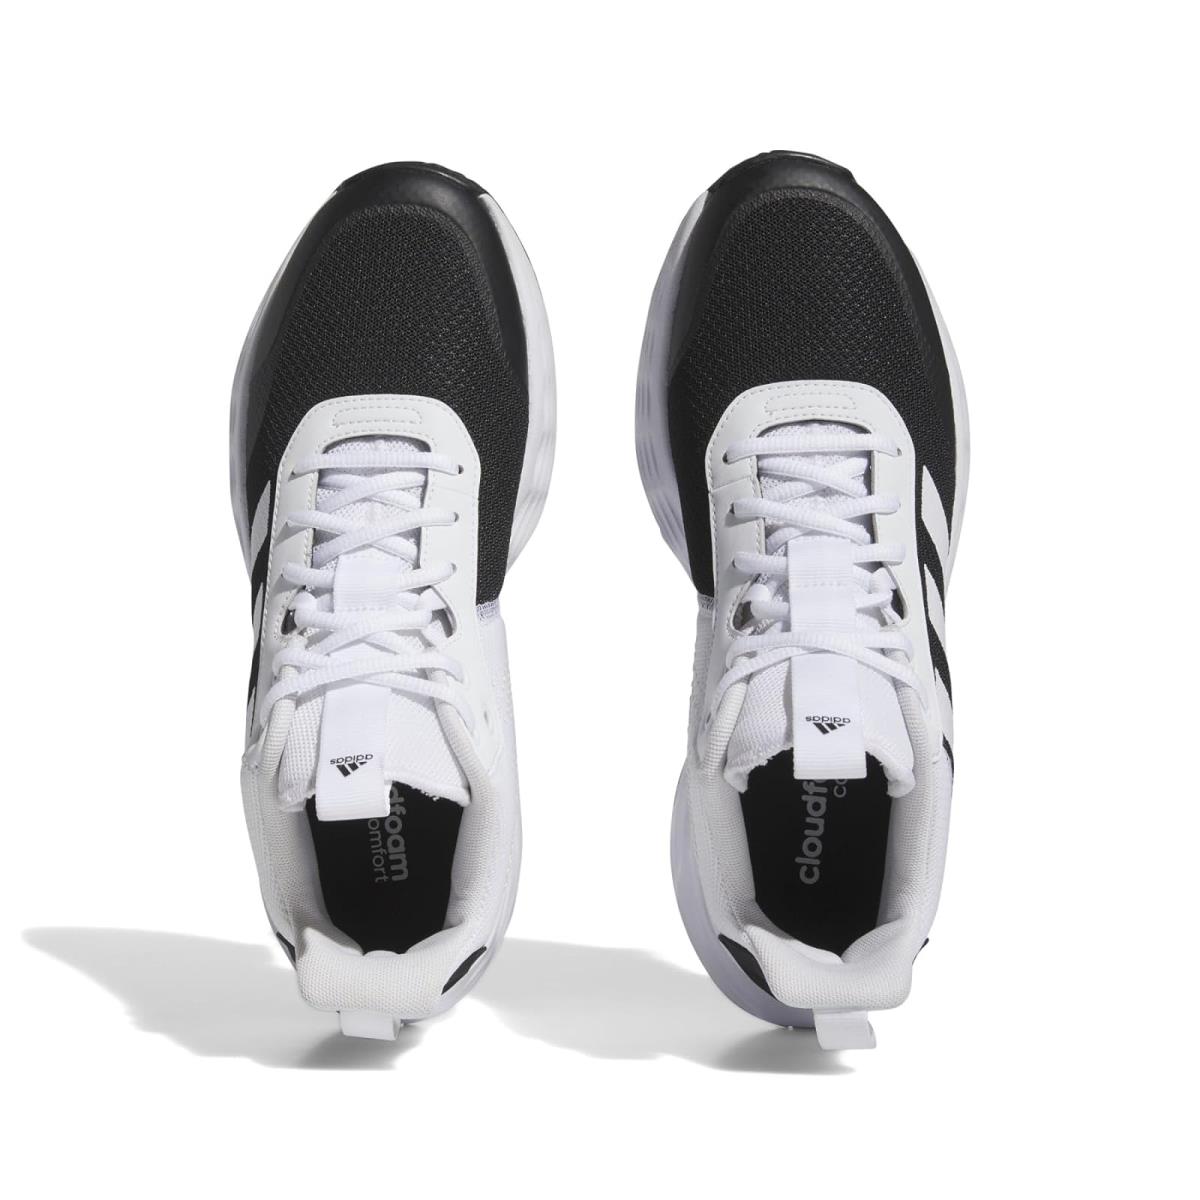 Man`s Sneakers Athletic Shoes Adidas Own The Game 2.0 Basketball Shoes - Footwear White/Footwear White/Core Black